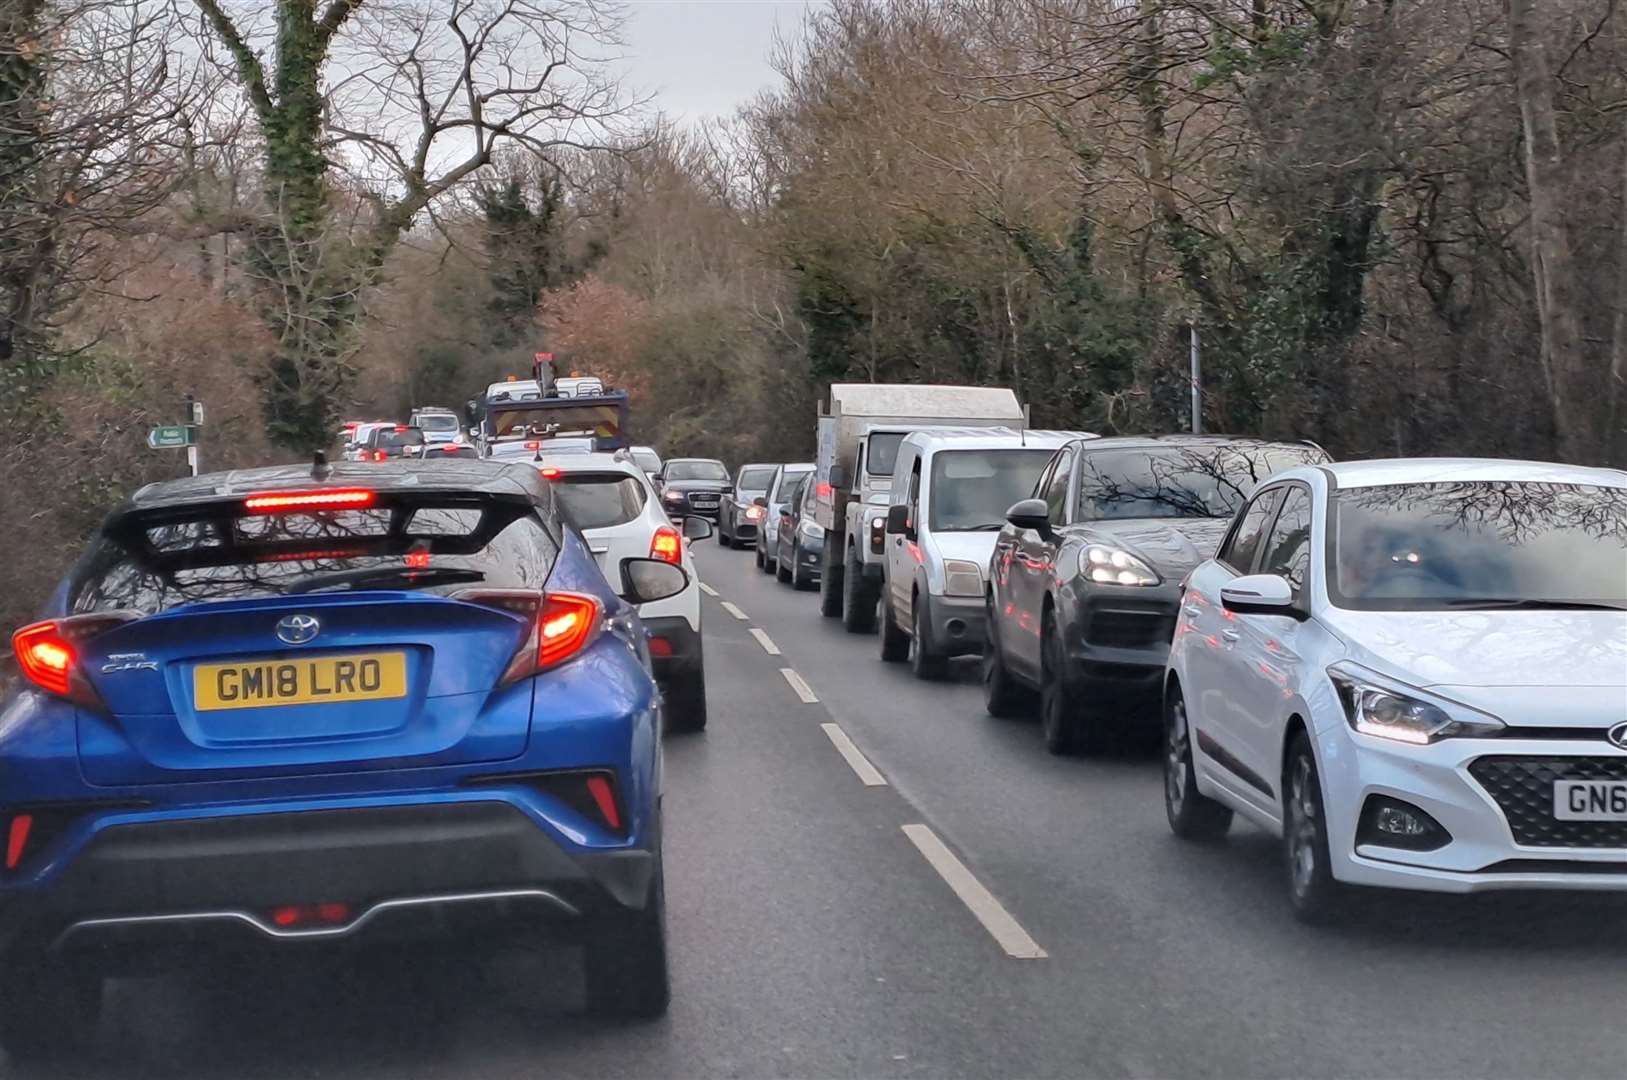 The A291 in Herne Common had heavy queues both ways on Monday